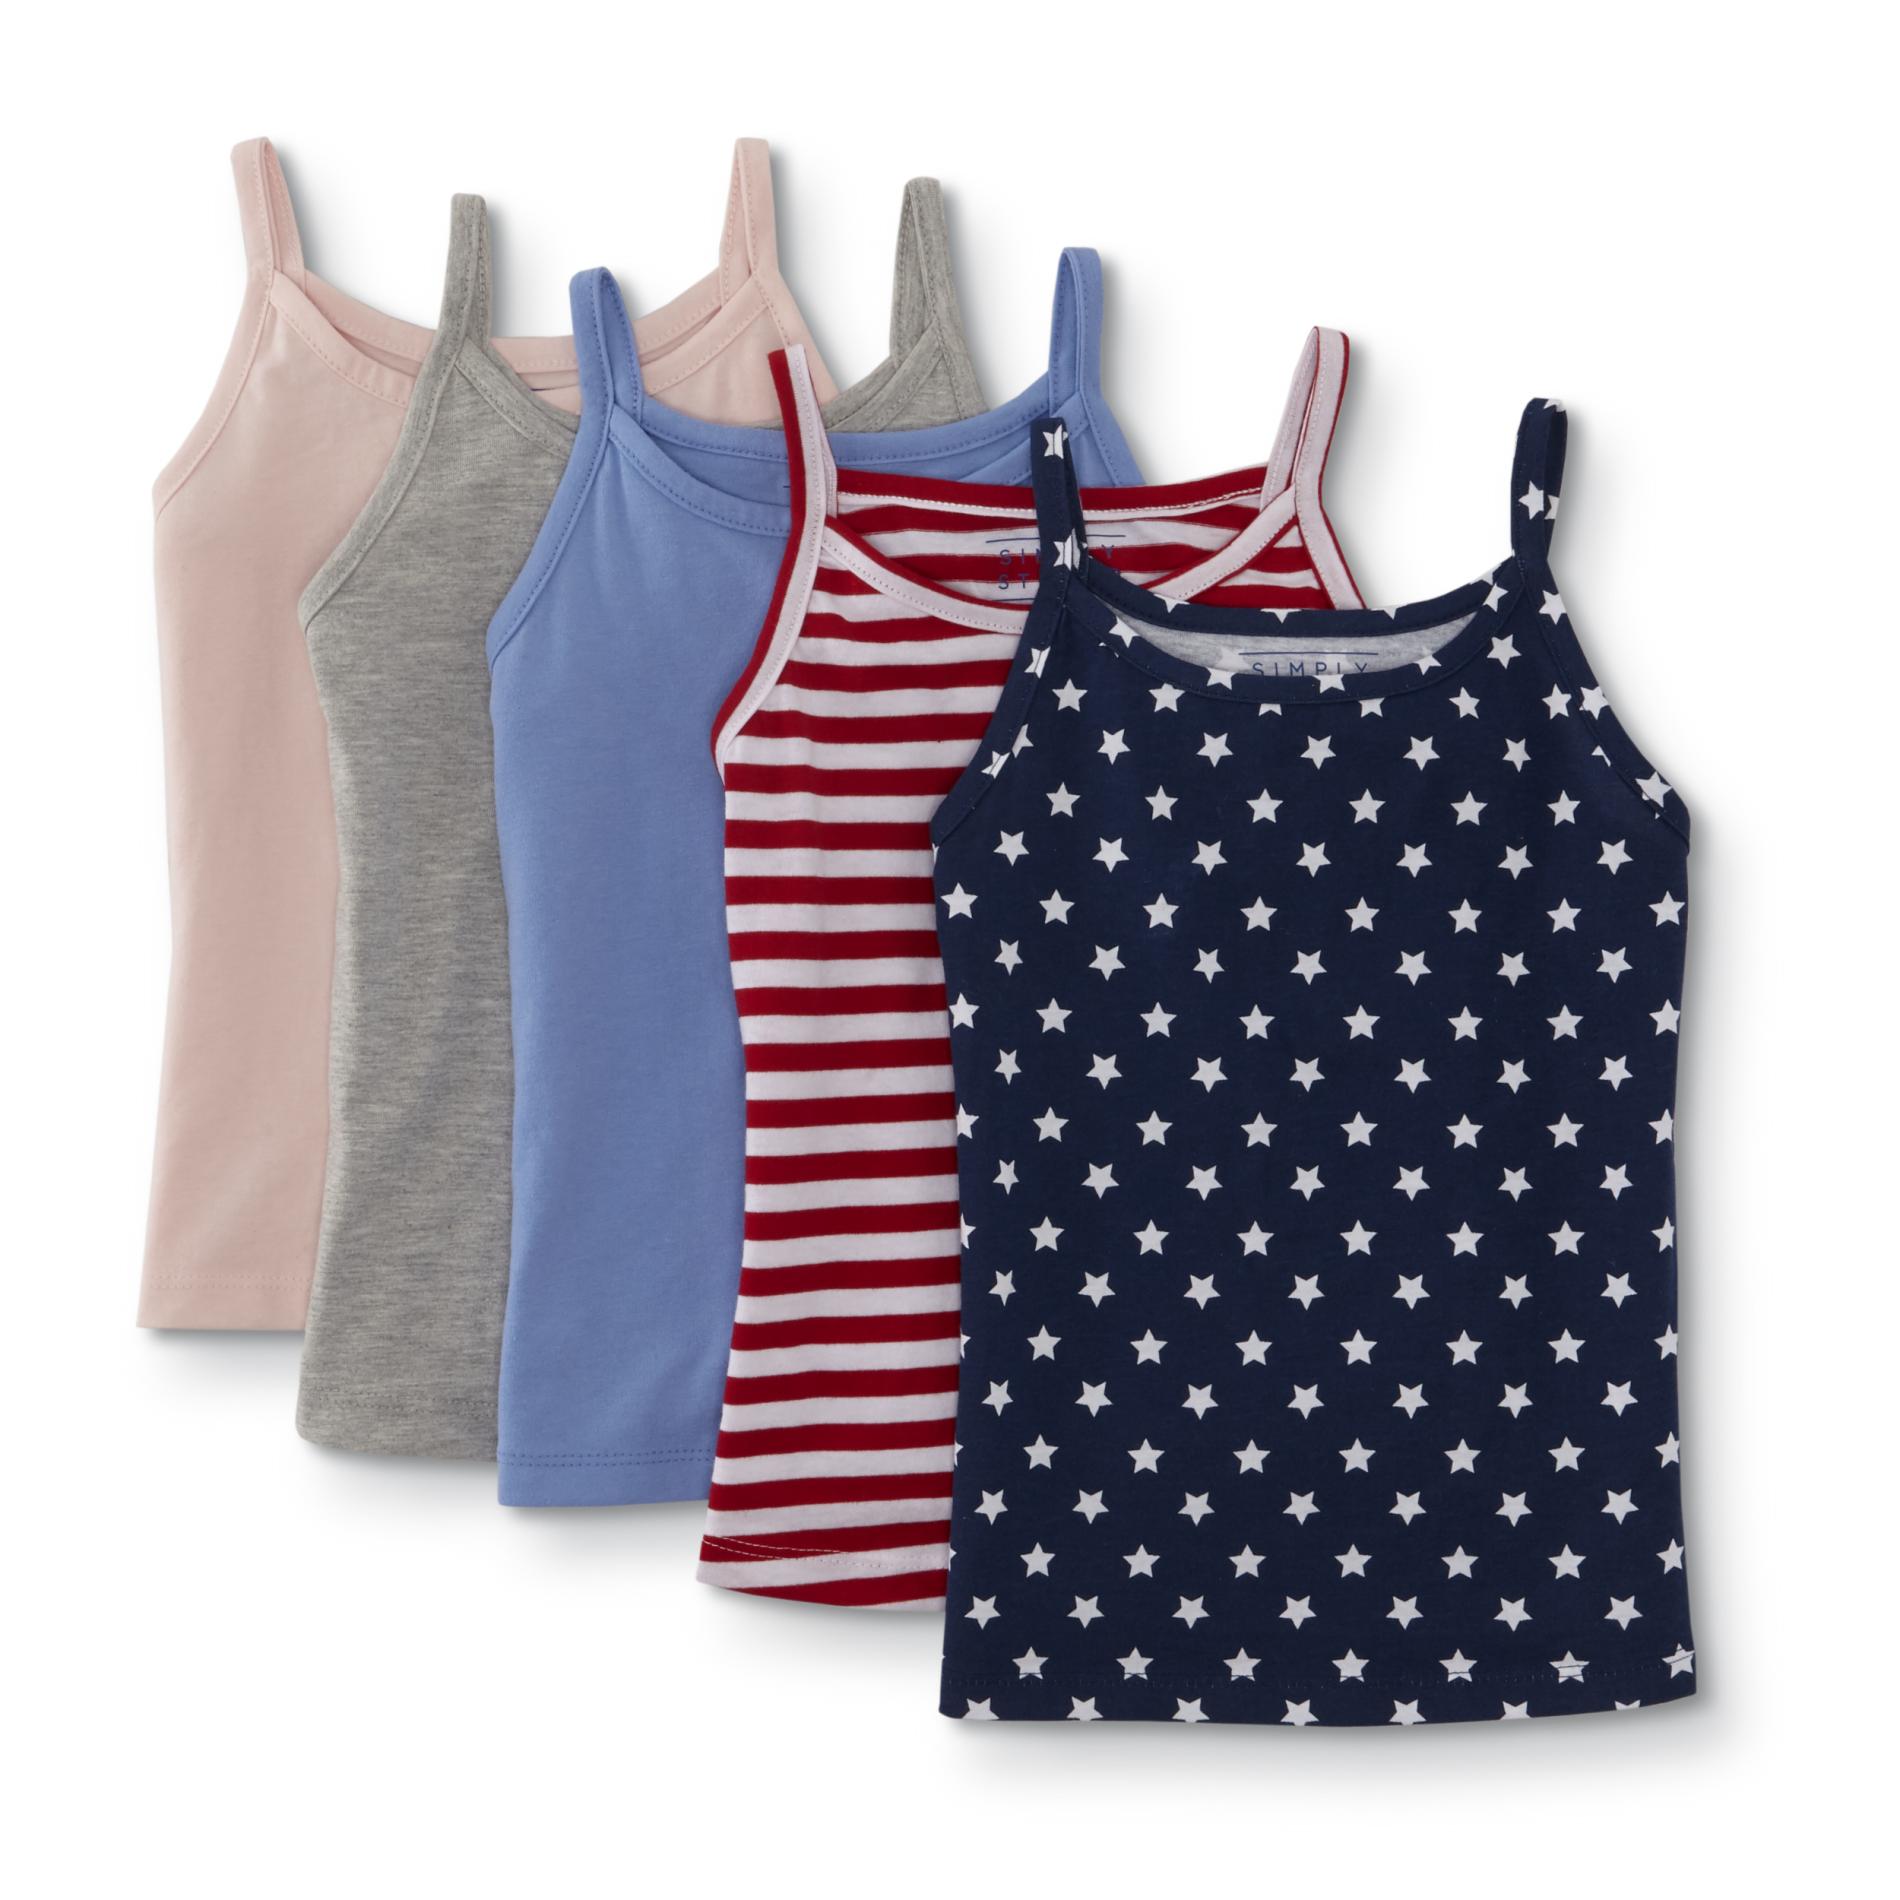 Simply Styled Girls' 5-Pack Tank Tops - Striped, Stars & Solid